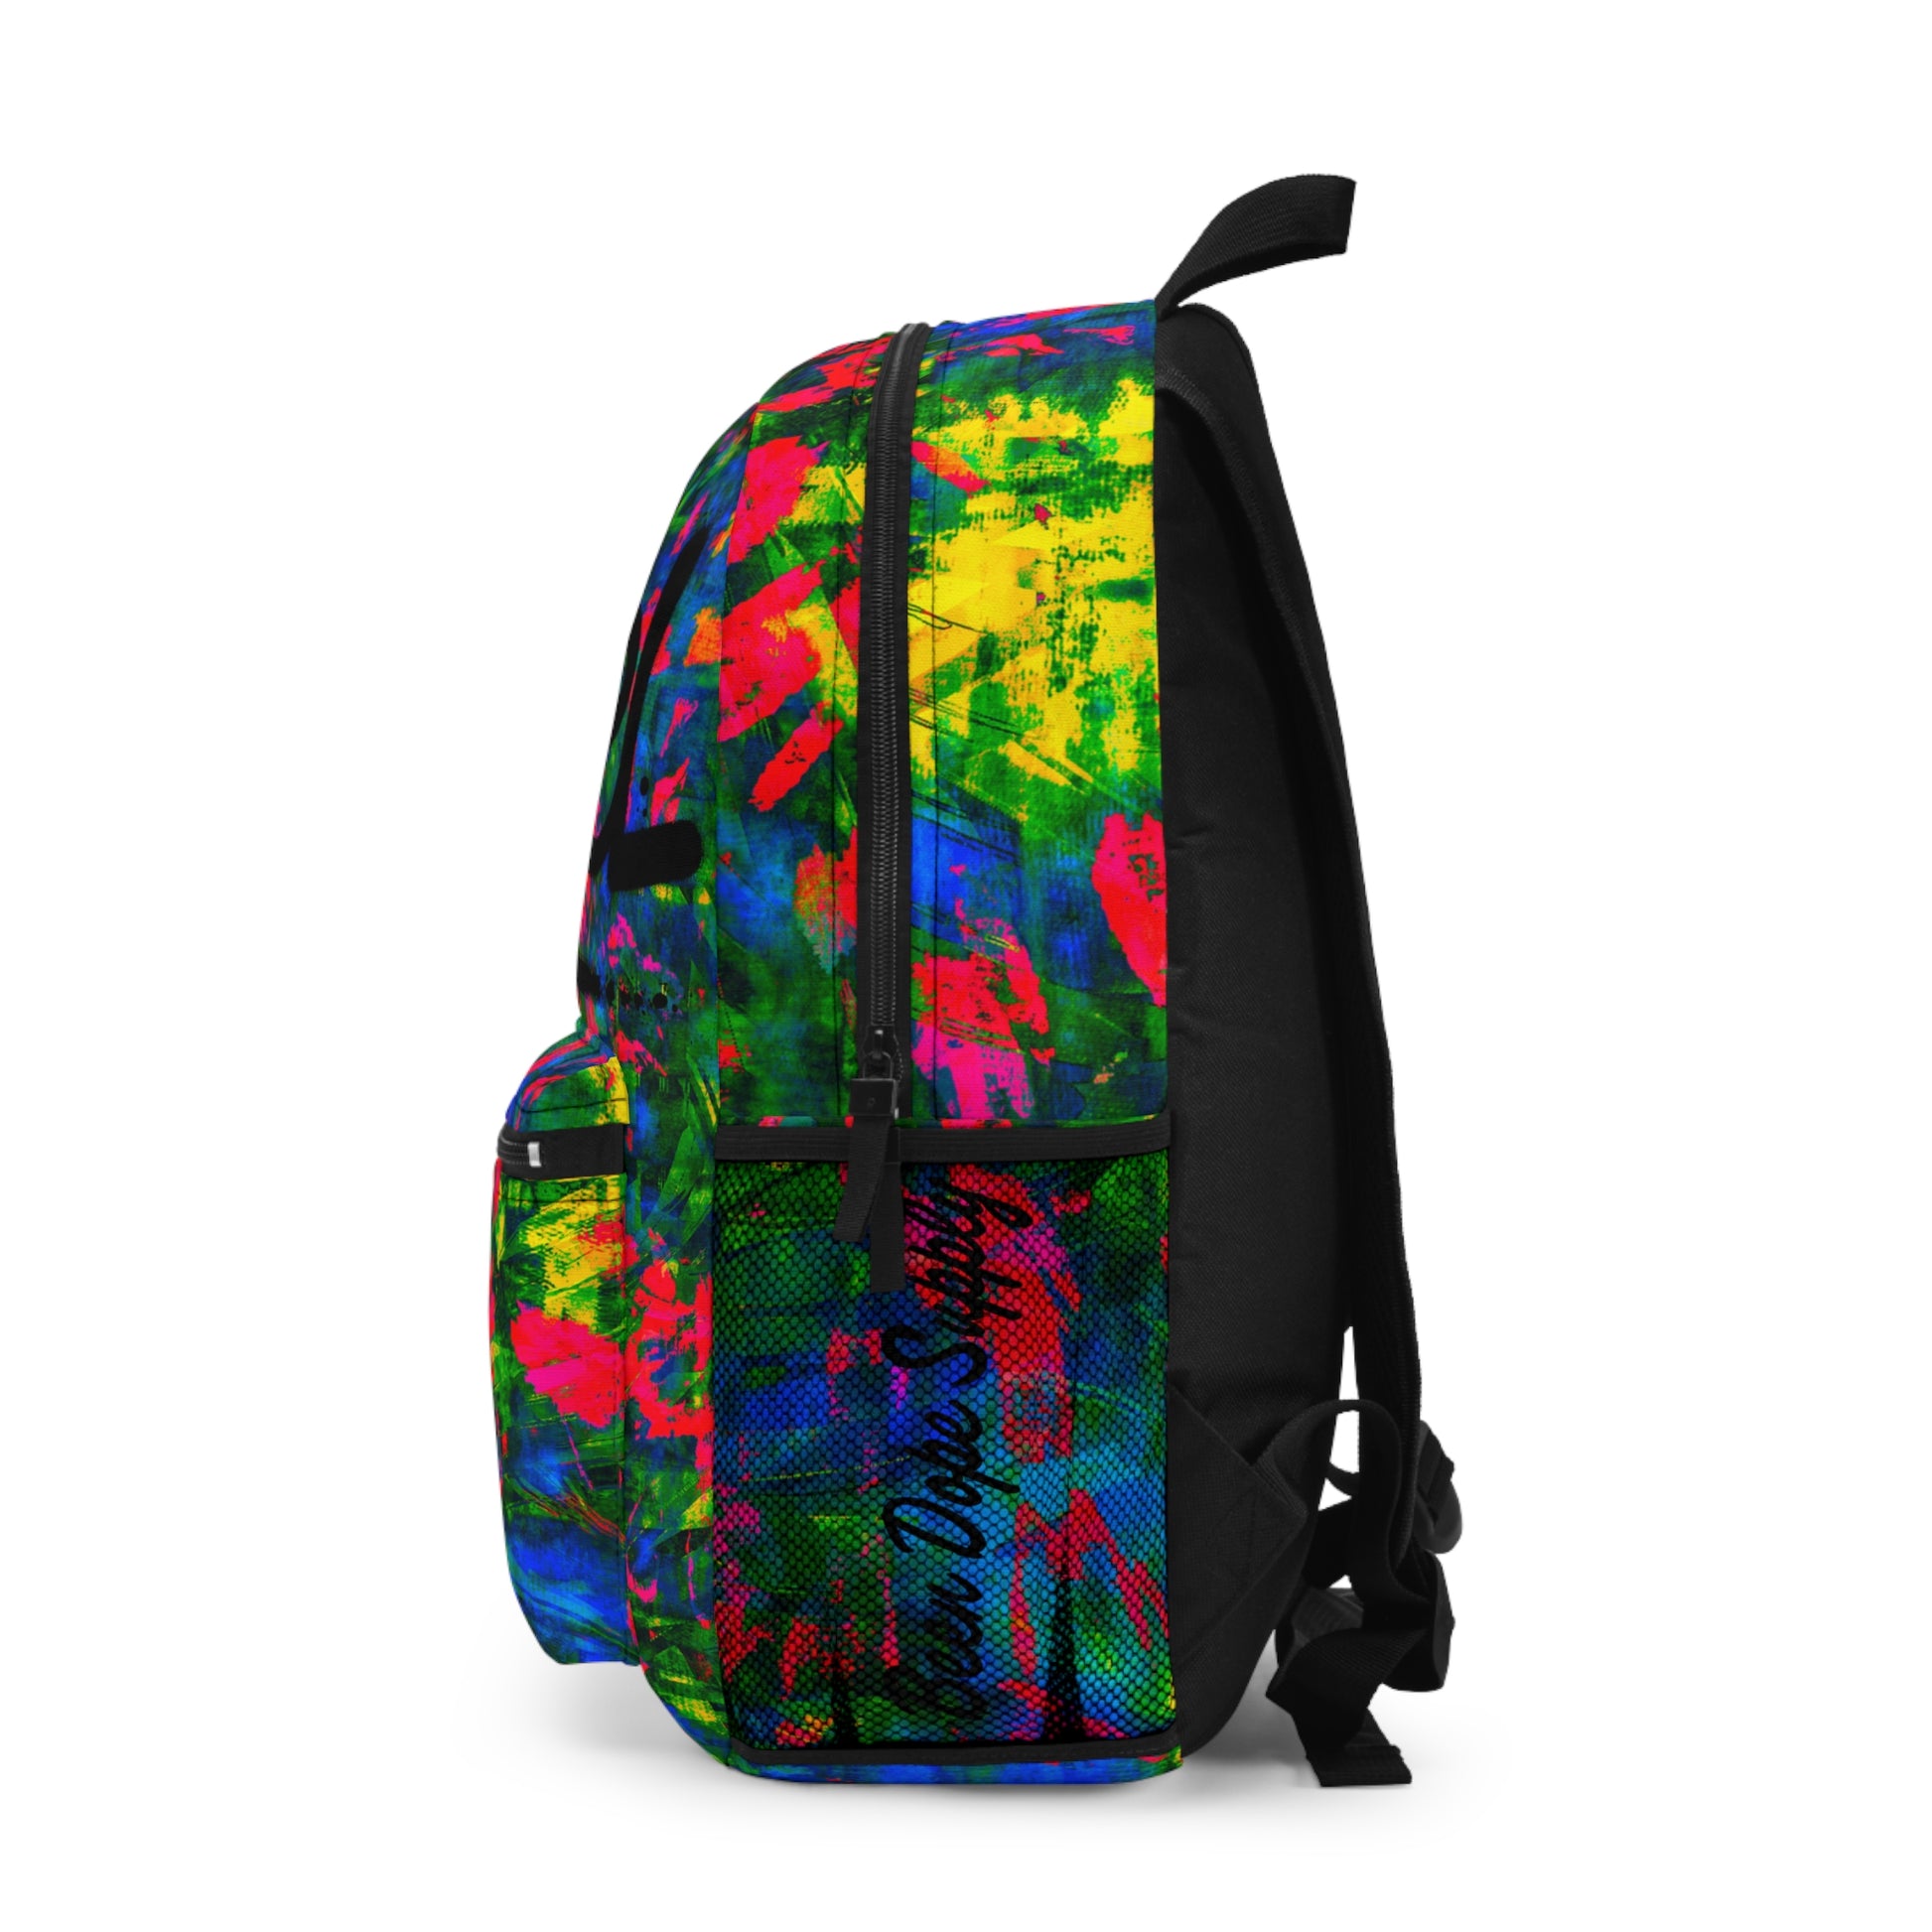 Cadillac Dreams Backpack - Been Dope Supply